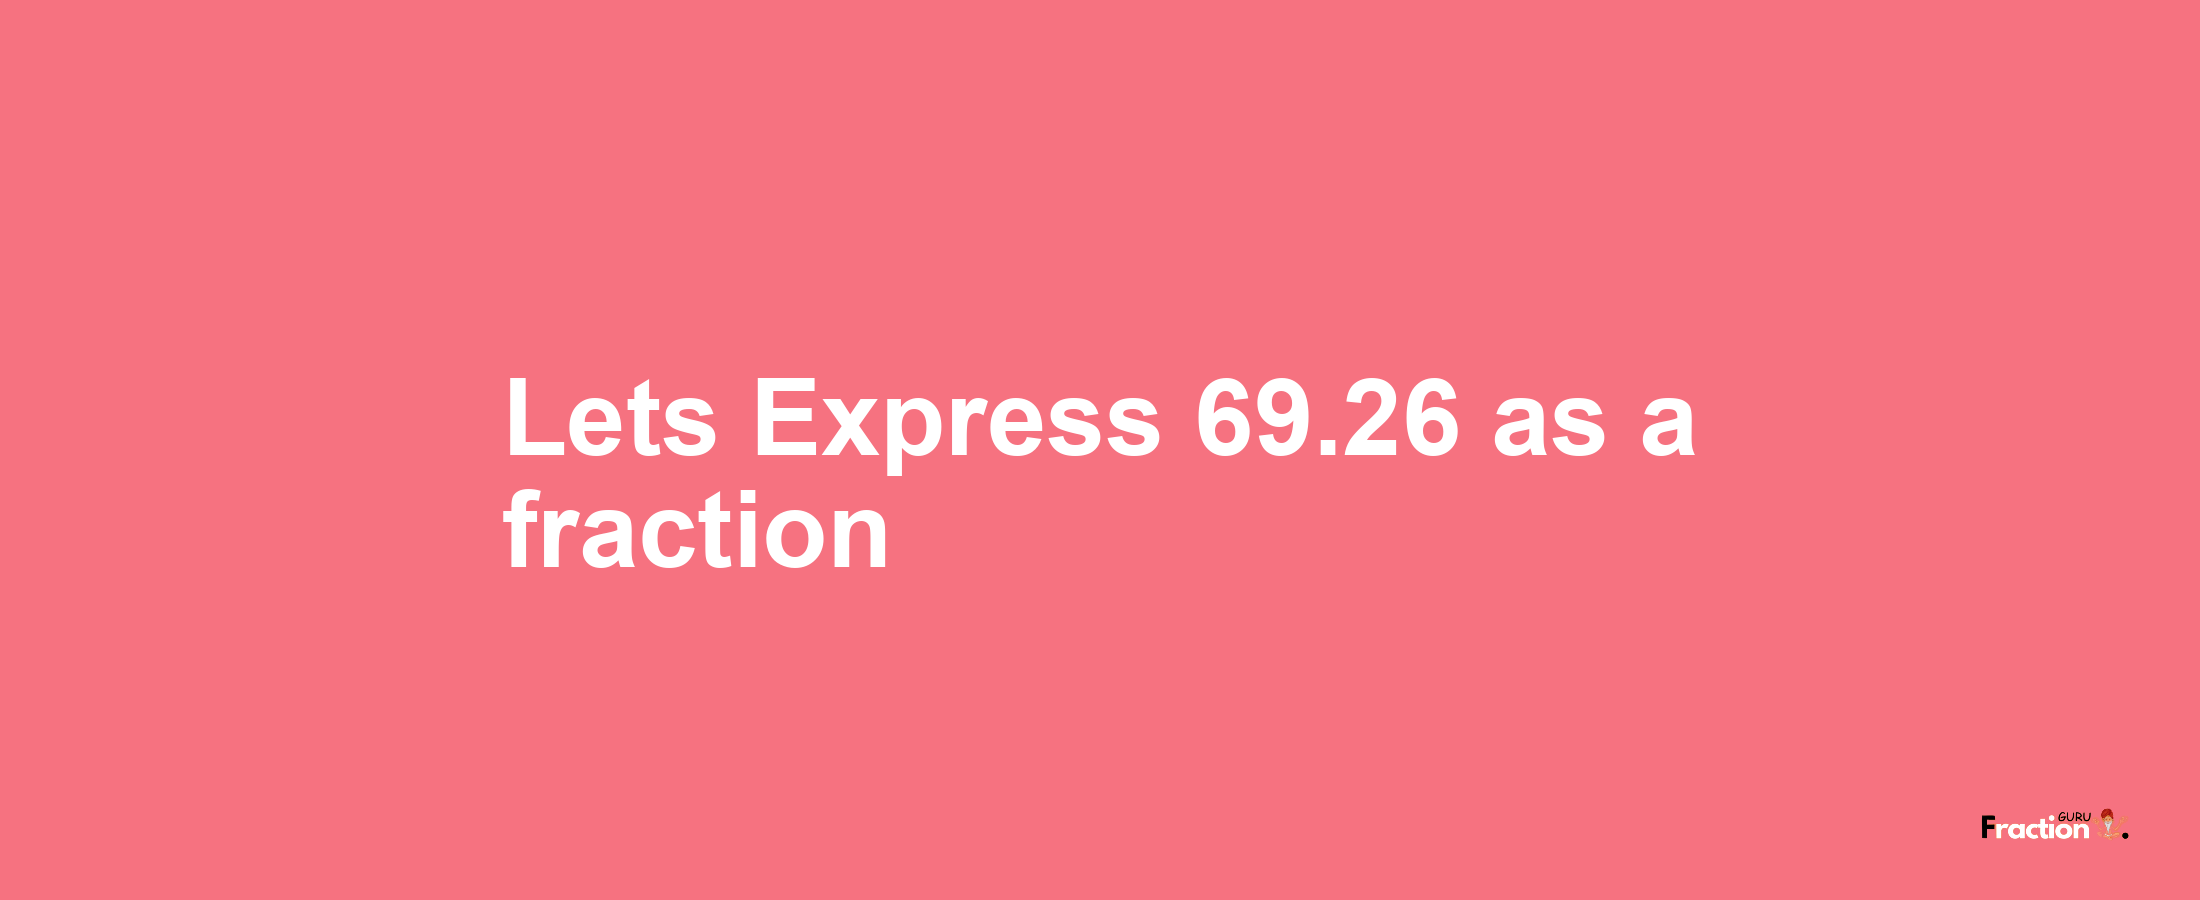 Lets Express 69.26 as afraction